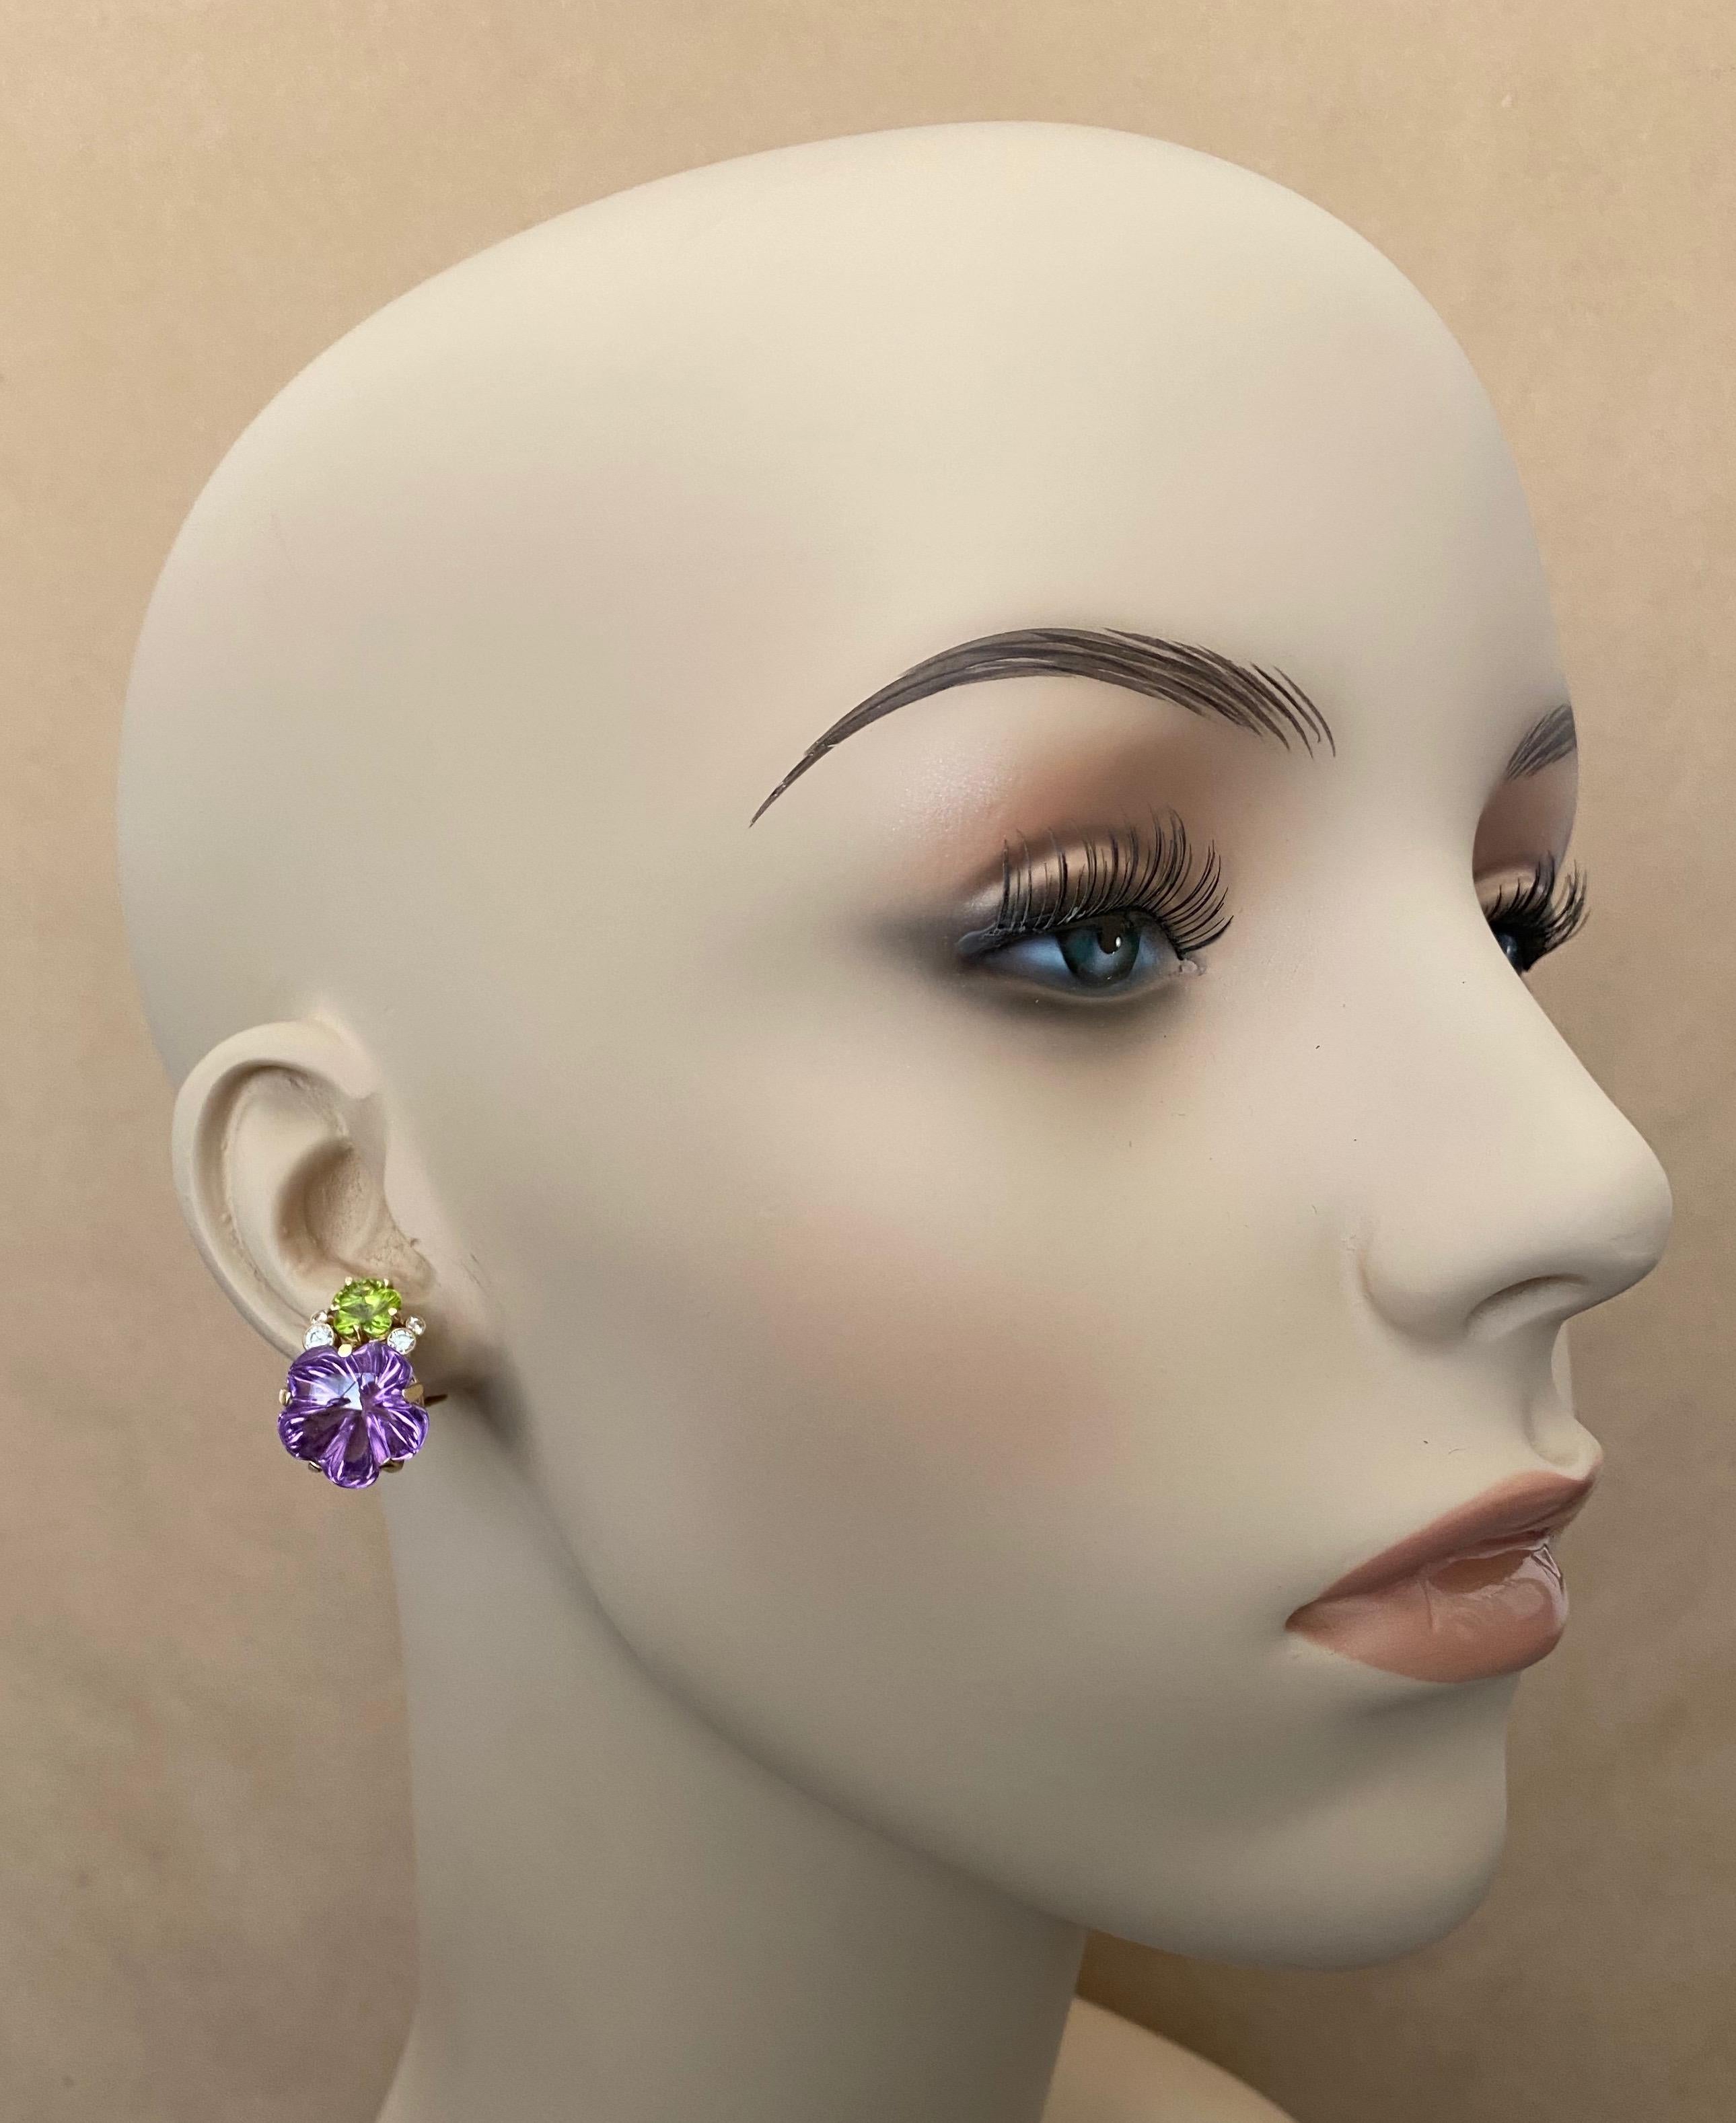 Amethyst and peridot gems (origins: Brazil) are carved into five petal flowers and featured in these one-of-a-kind button earrings.  Purple and lime green make a dynamic color combination  The gems are brilliant in color, exceptionally carved and